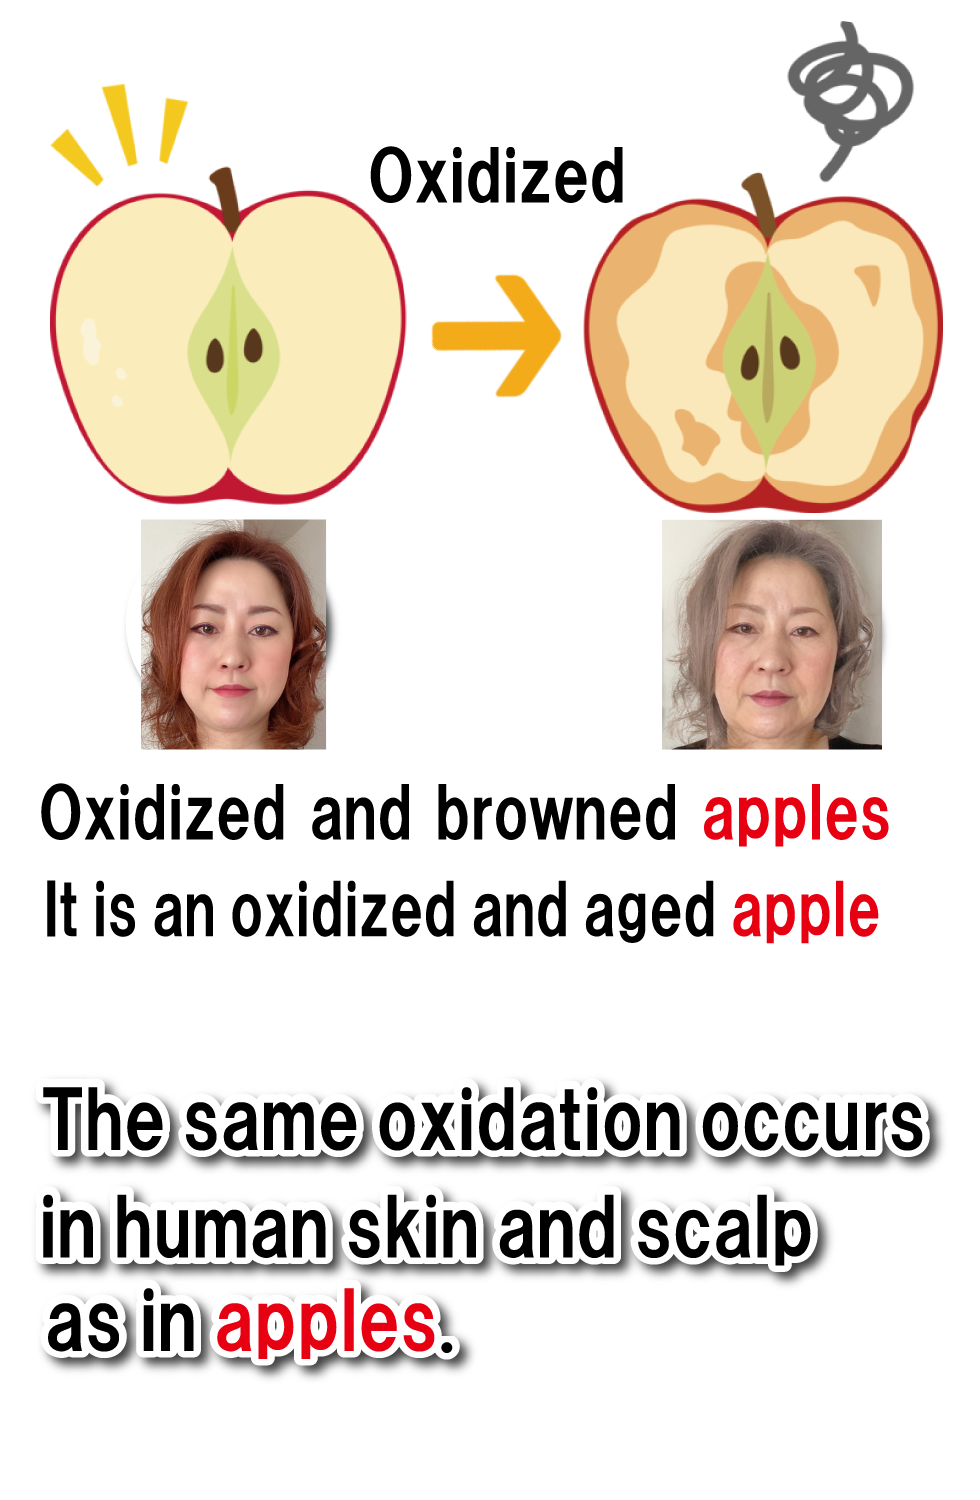 An apple that has oxidized and turned brown. An apple that has become oxidized and aged. The same oxidation that occurs in apples occurs in the human skin and scalp.